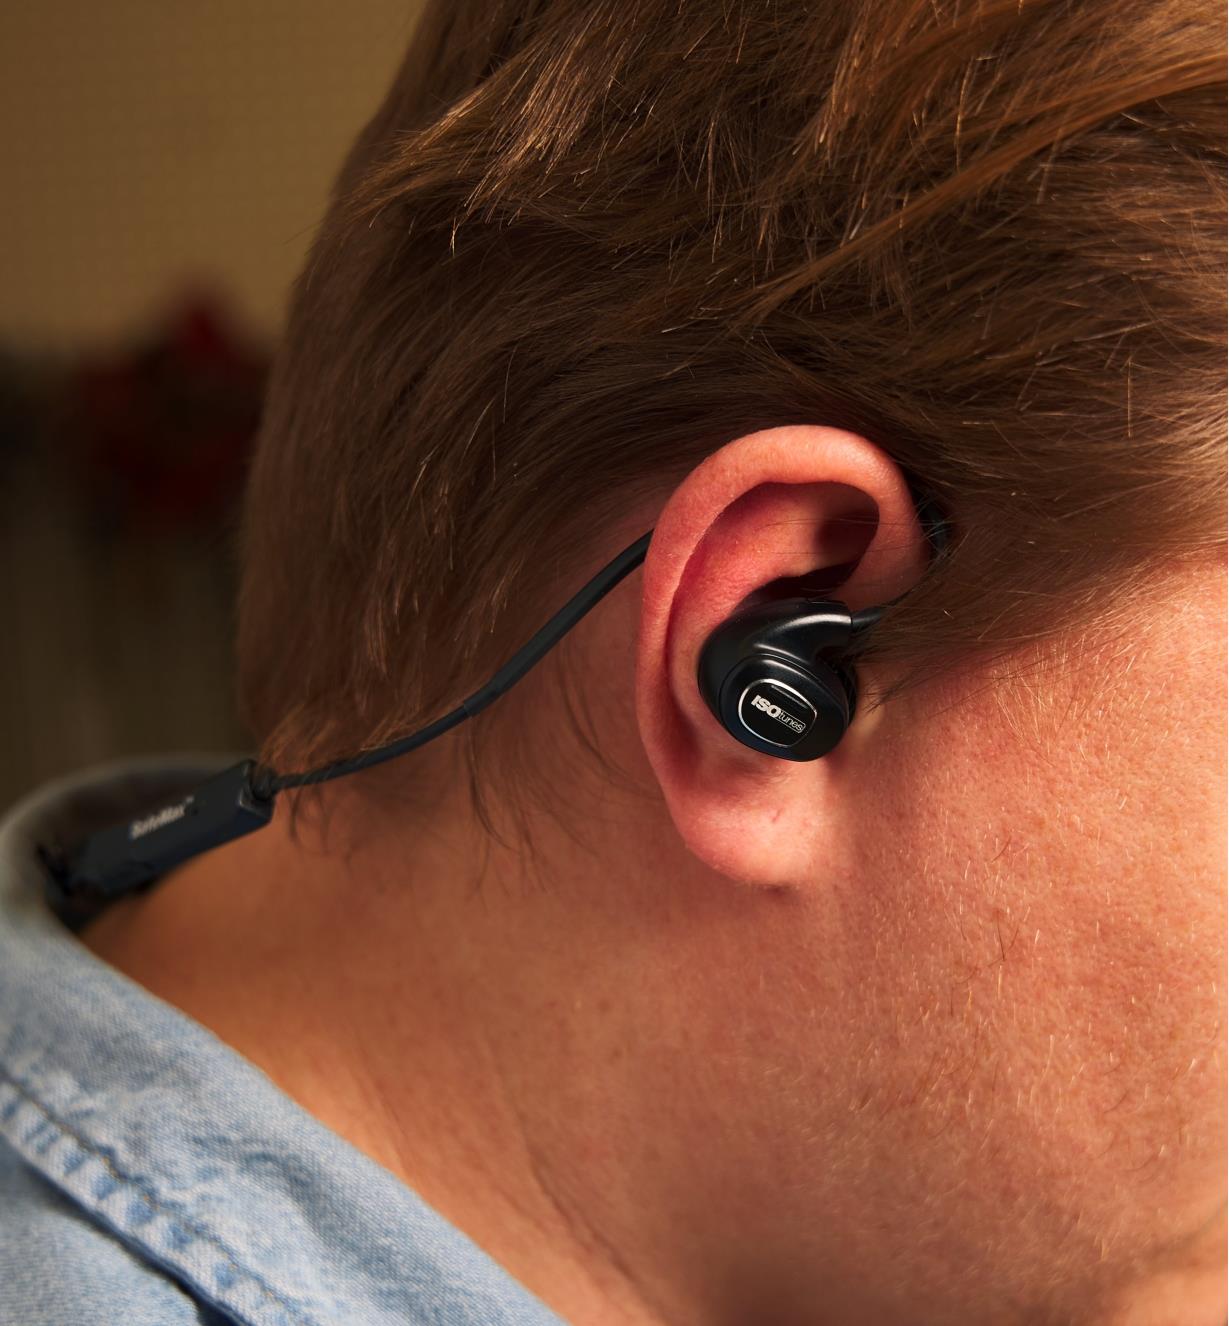 ISOtunes earbud hearing protectors worn with the pliable wire formed behind the ear for a snug fit